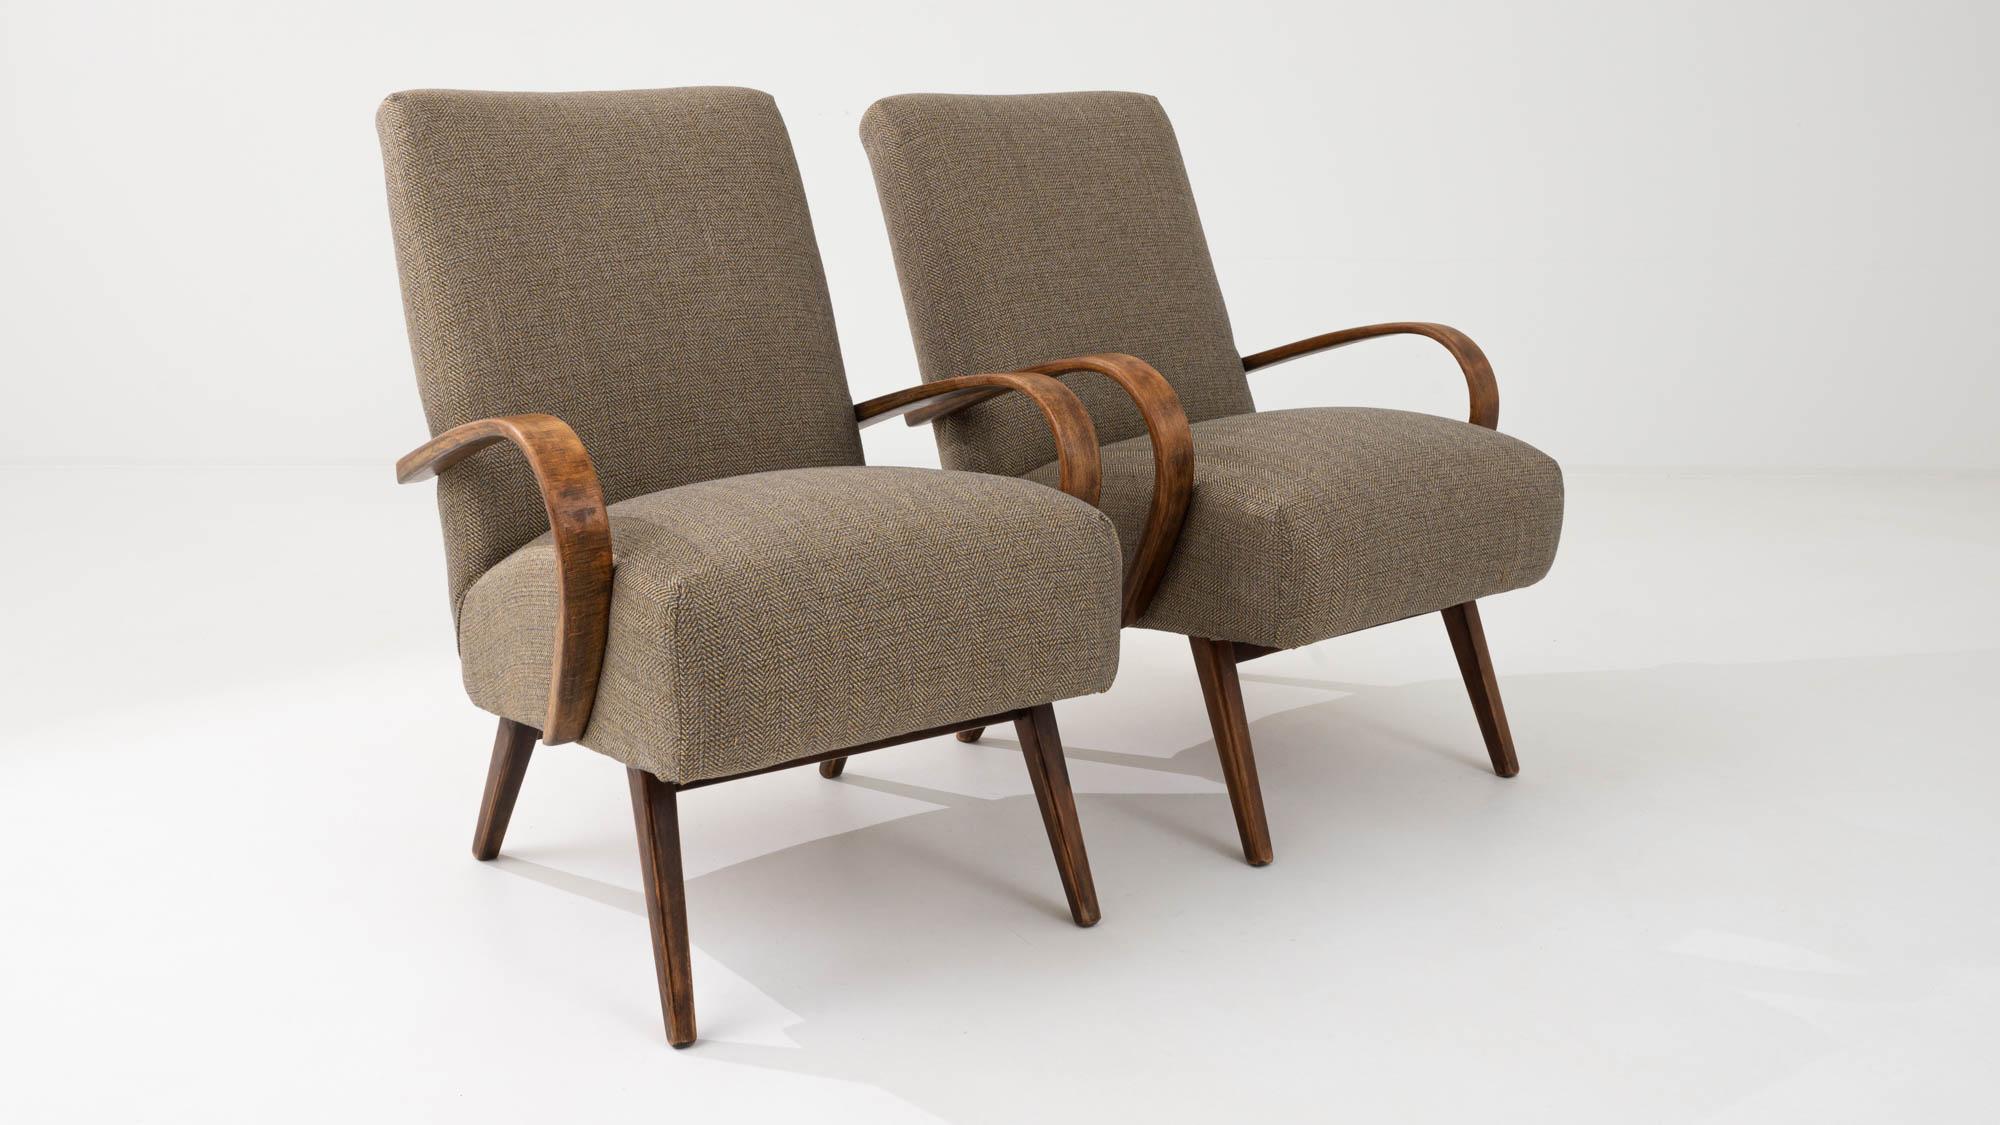 1950s Czech Beige Upholstered Armchairs, a Pair For Sale 5